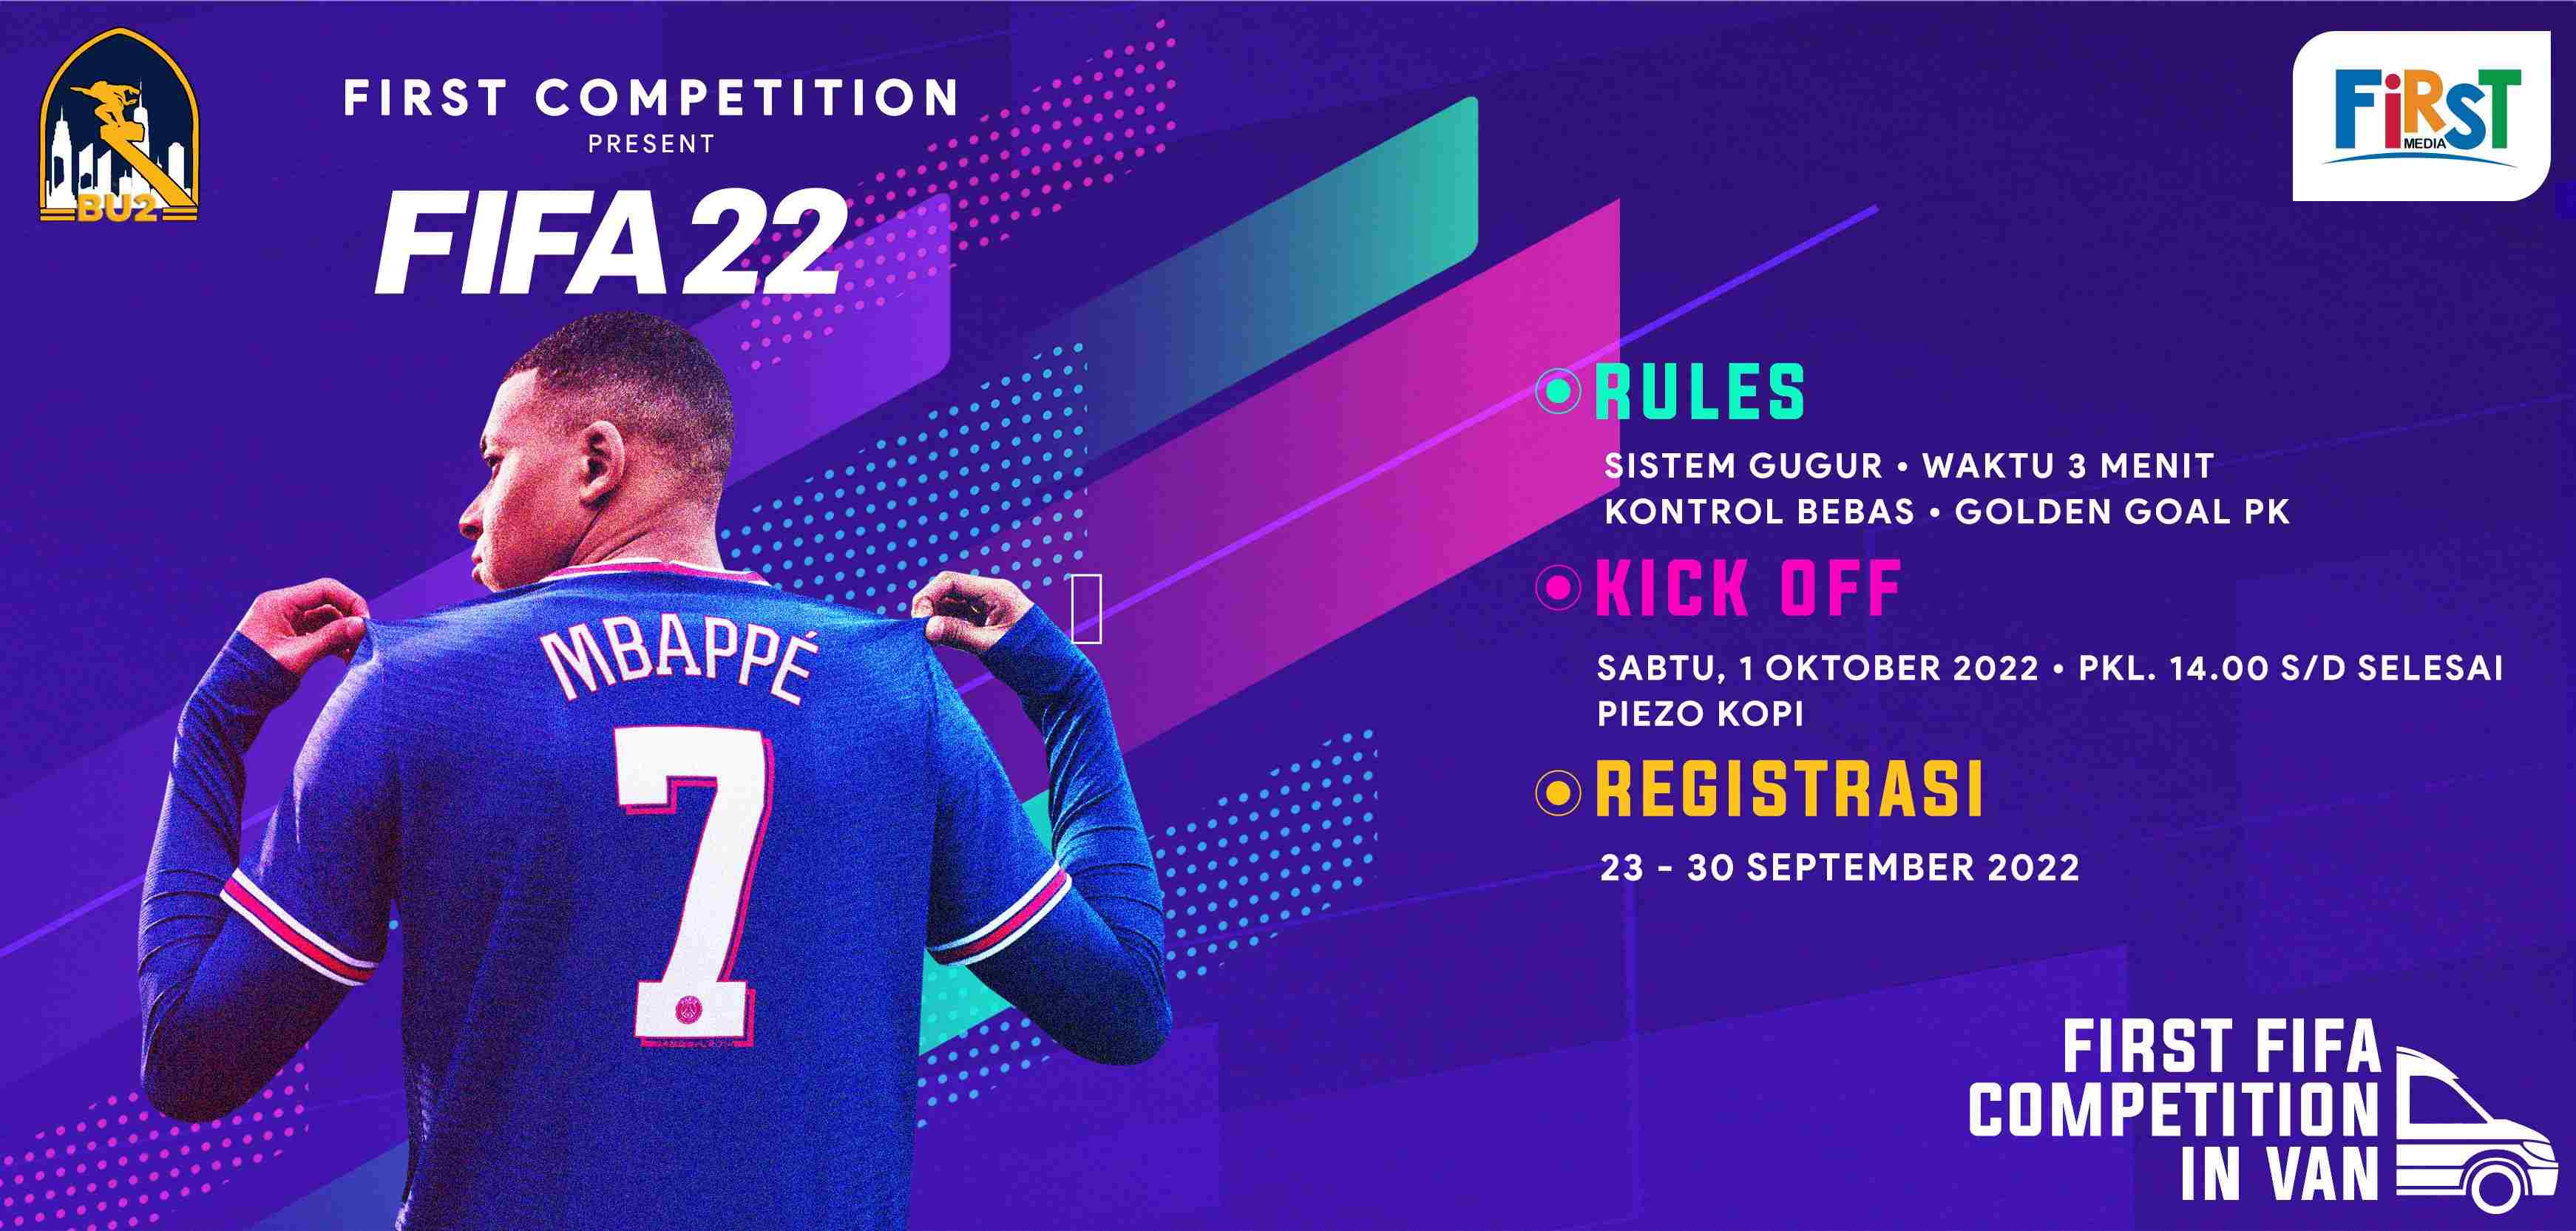 First Competititon - First Time FIFA22 Competition in VAN